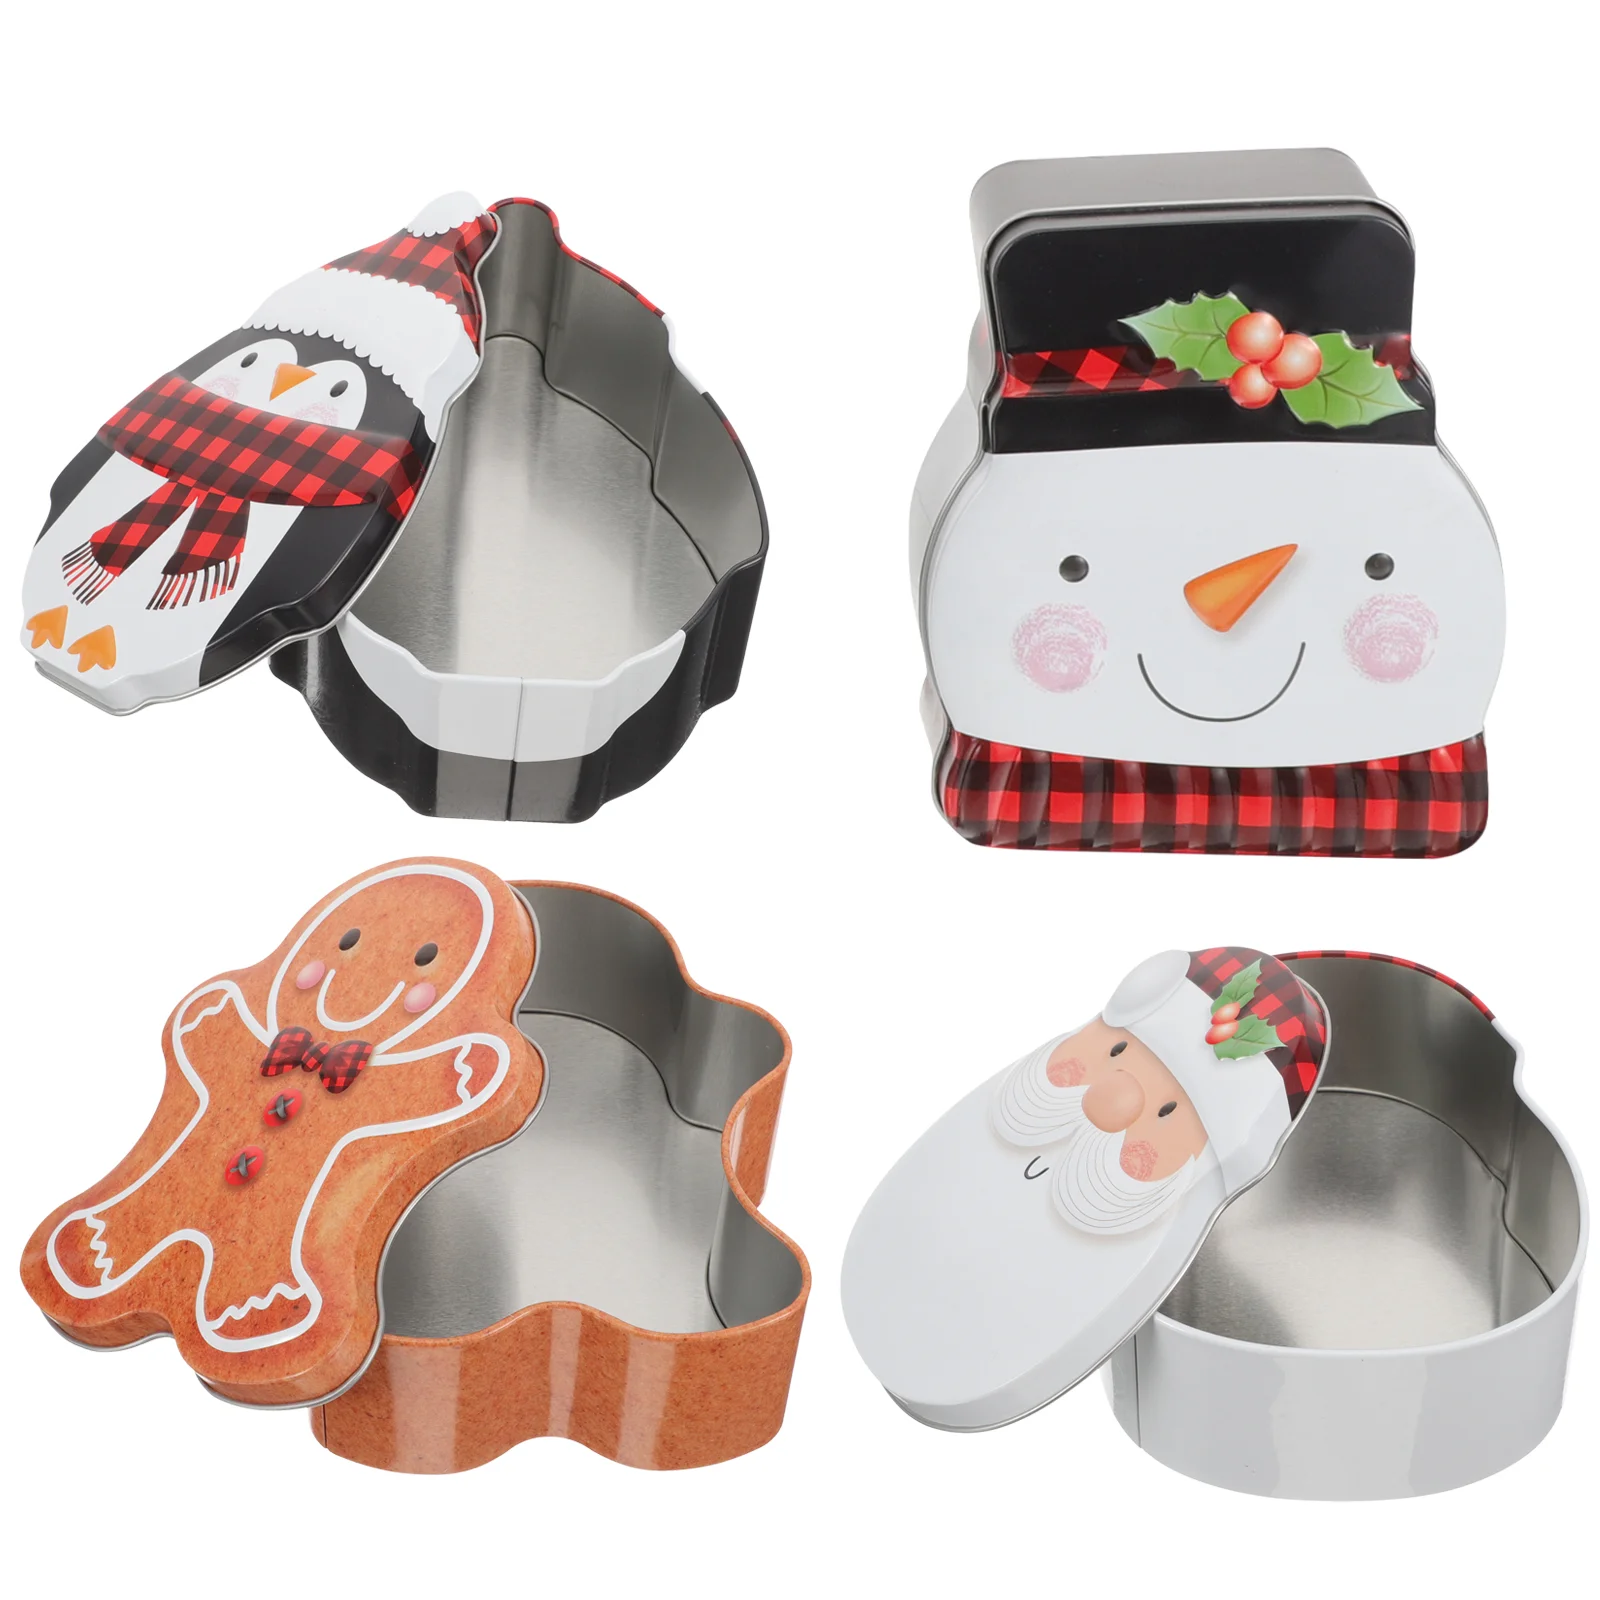 

Christmas Cookie Tins Santa Claus Snowman Candy Biscuits Box Tinplate Cookie Containers Xmas Bakery Treat Boxes Xmas Holiday